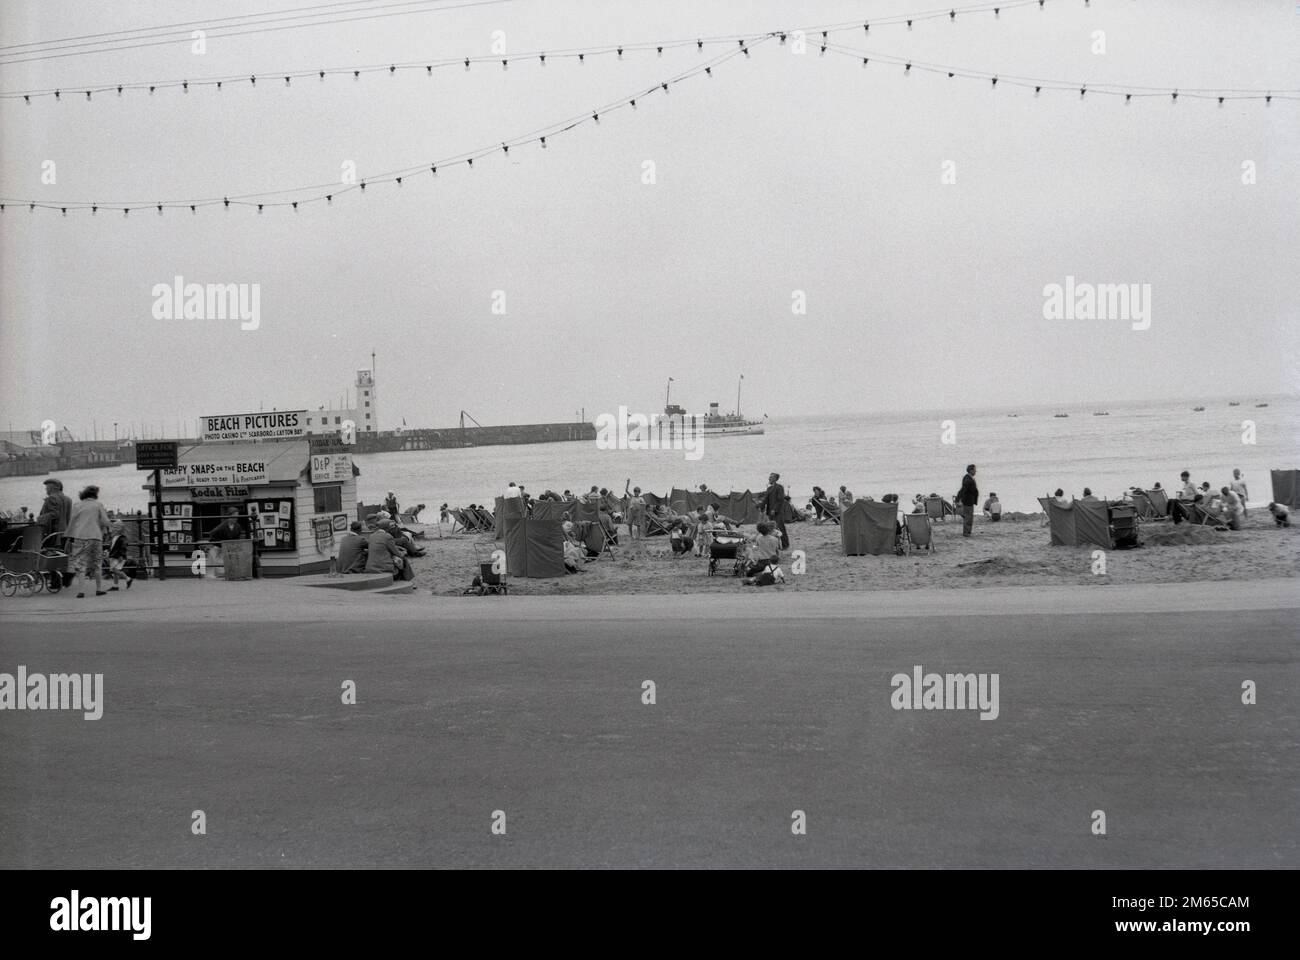 1950s, historical, people at the beach at North bay on Scarborough, a seaside resort in East Yorkshire, England, UK. A kiosk there 'Beach Pictures' offers Happy Snaps on the Beach produced by Photo Casino Ltd of Scarborough & Clayton Bay. The coastal town grew to be a major seaside destination and by many photographic studios were set up to provide holiday pictures for the visitors, including after WWII, Photo Casino Co Ltd. Stock Photo